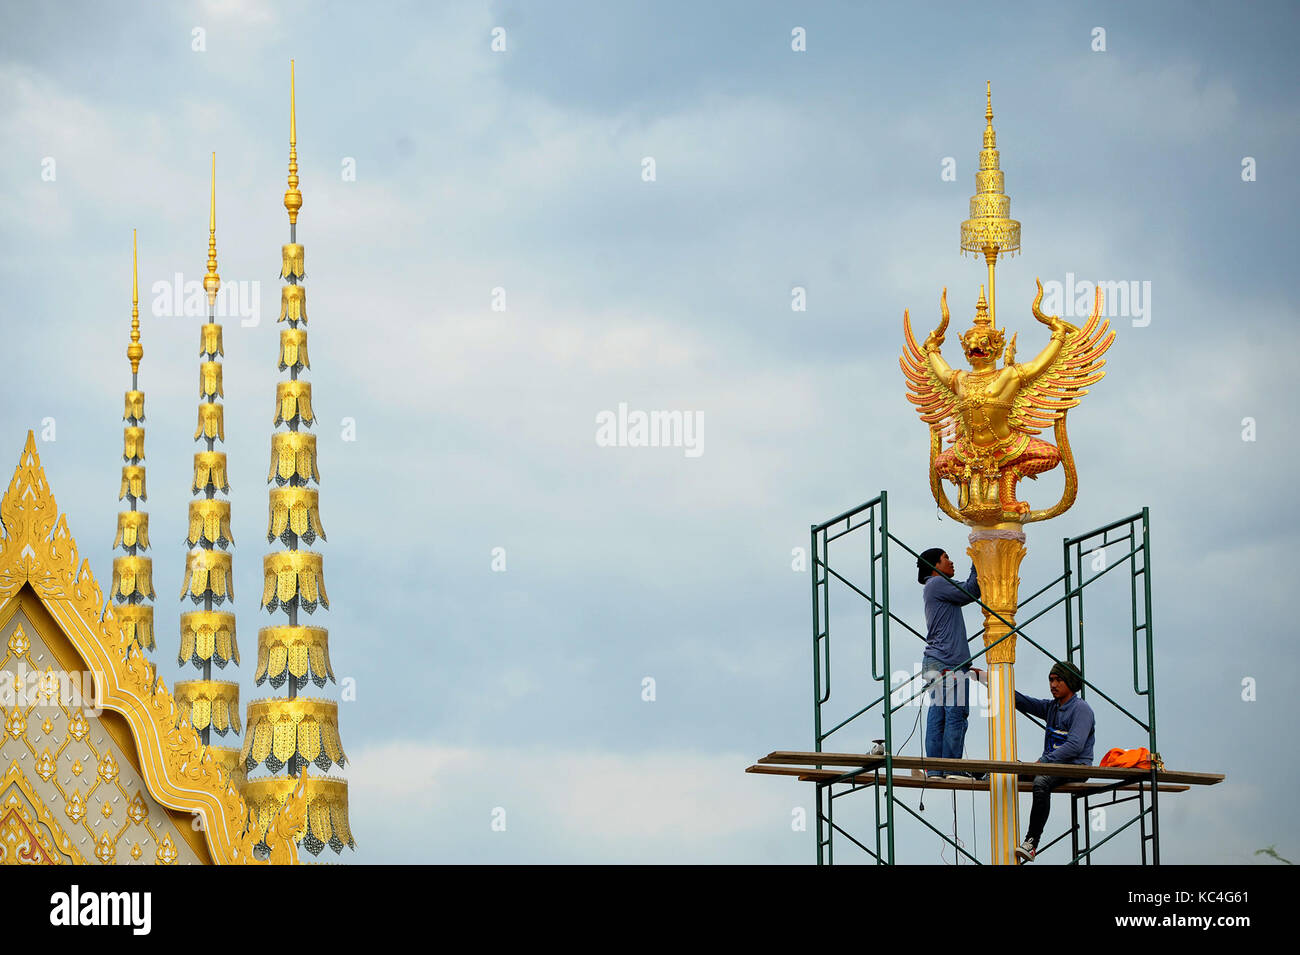 Bangkok, Thailand. 2nd Oct, 2017. Workers apply gold paint to a decorative pillar at the construction site of the royal crematorium for the late Thai King Bhumibol Adulyadej in Bangkok, Thailand, Oct. 2, 2017. A royal funeral for Thailand's late King Bhumibol Adulyadej is scheduled in late October. Credit: Rachen Sageamsak/Xinhua/Alamy Live News Stock Photo